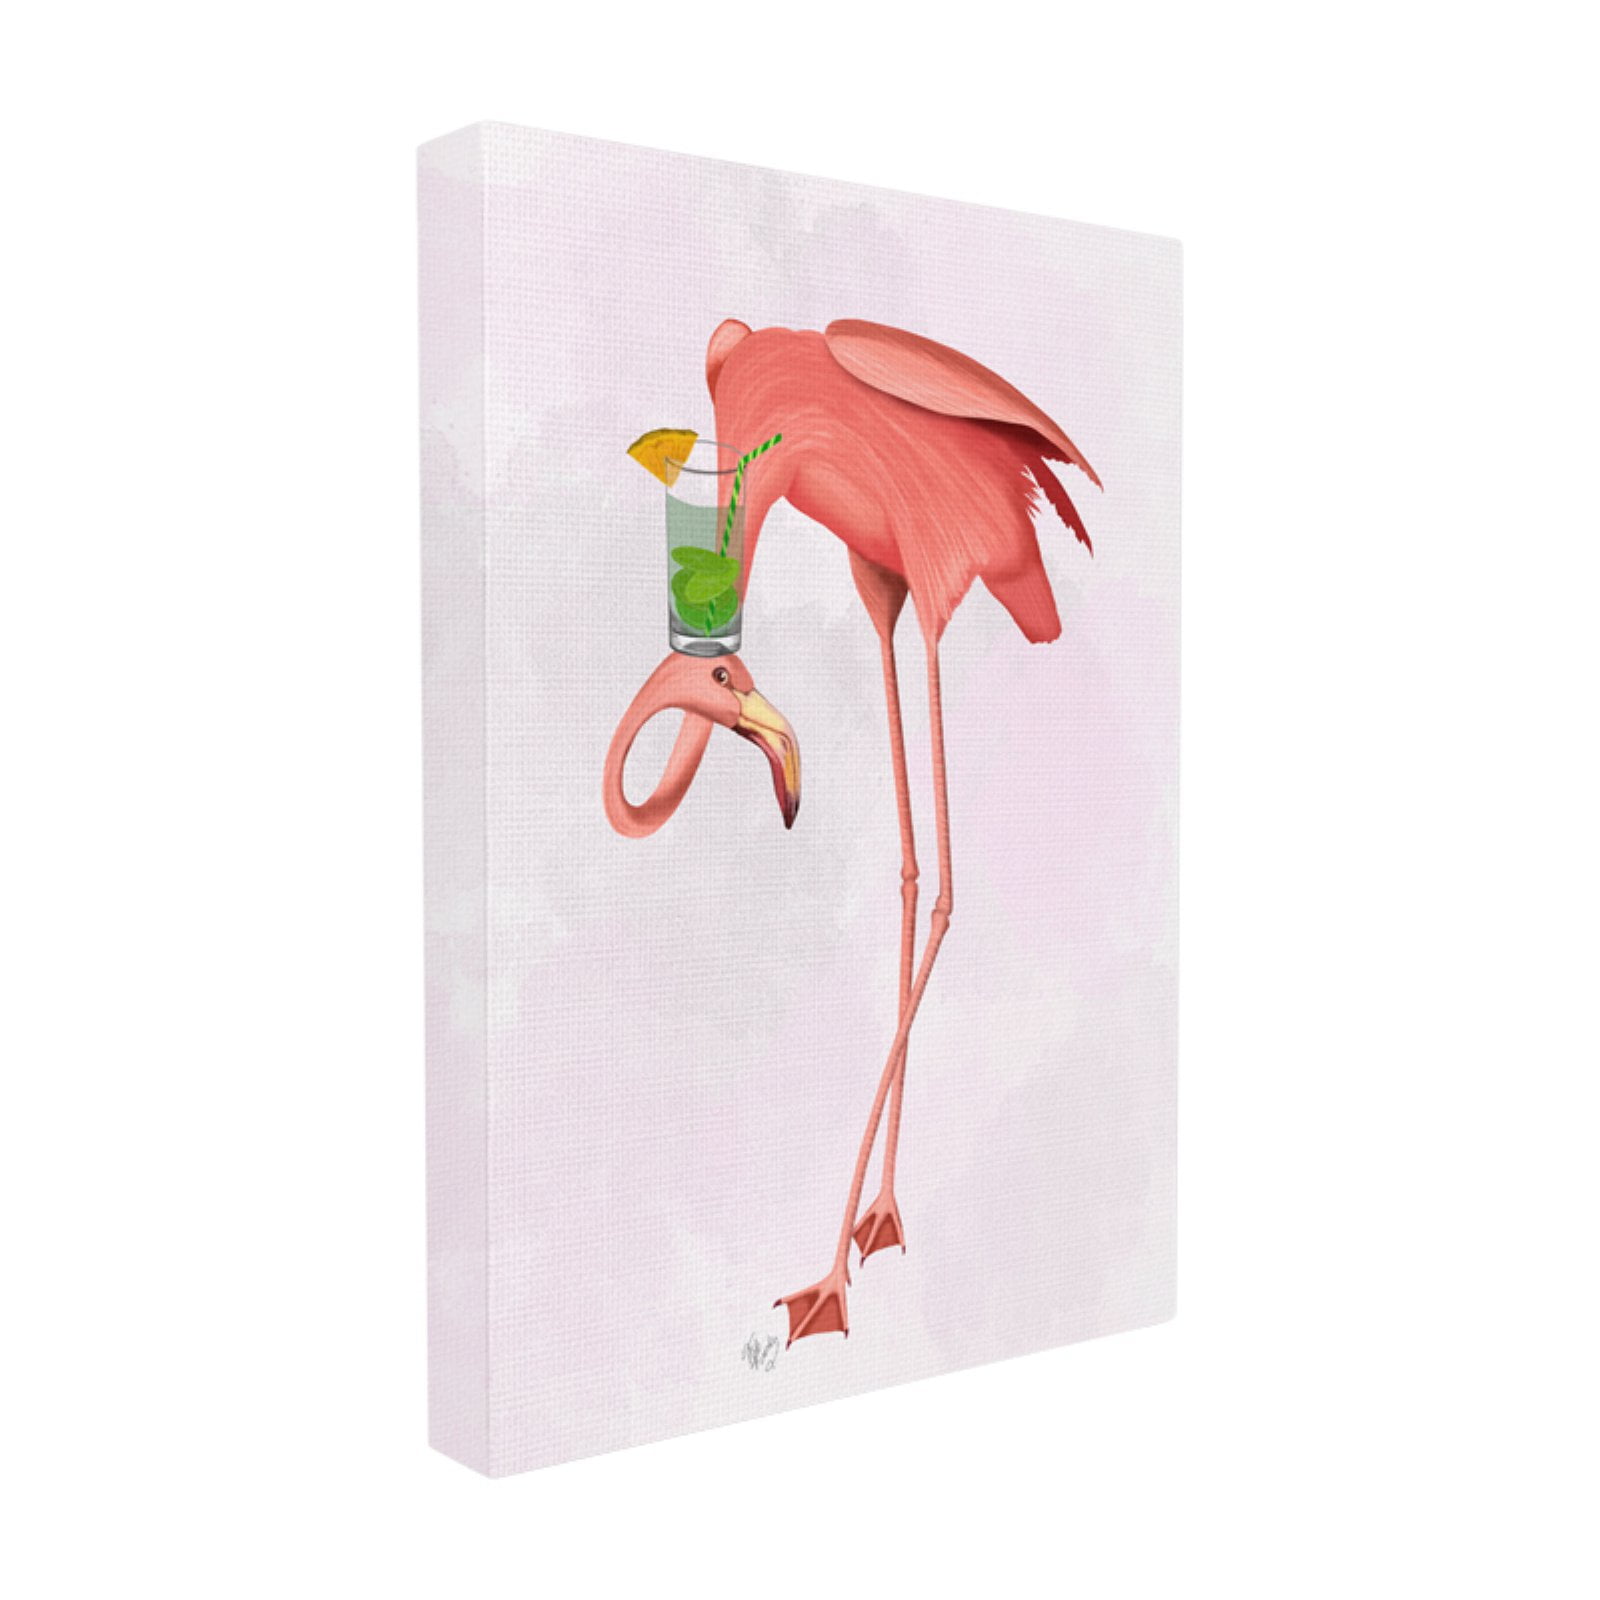 The Stupell Home Decor Collection Fancy Pants Flamingos Framed Texturized Art 12 x 1.5 x 12 Multicolor 